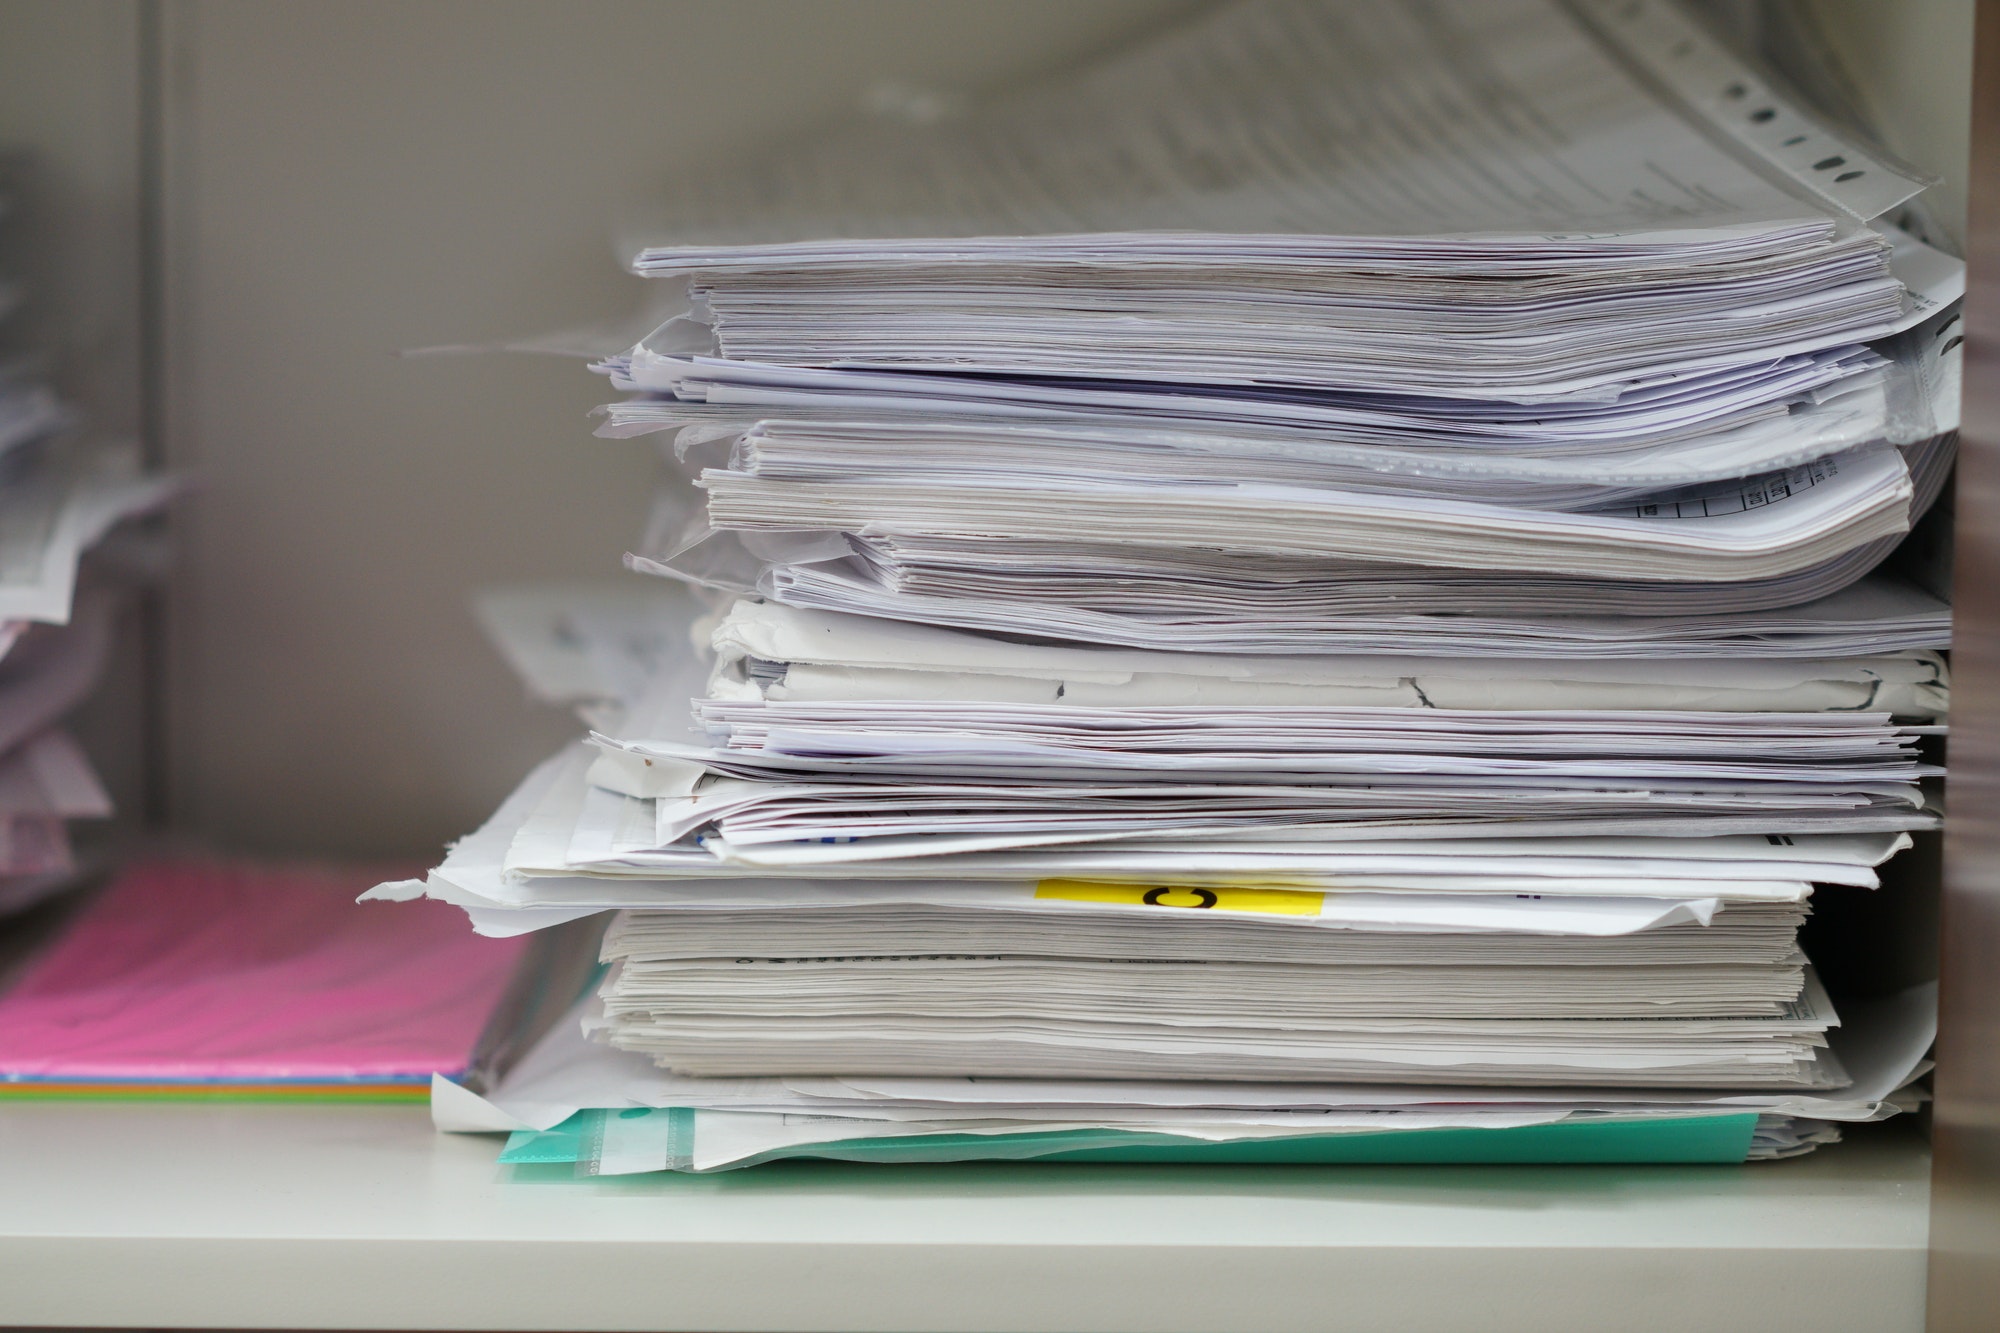 Pile of documents and files